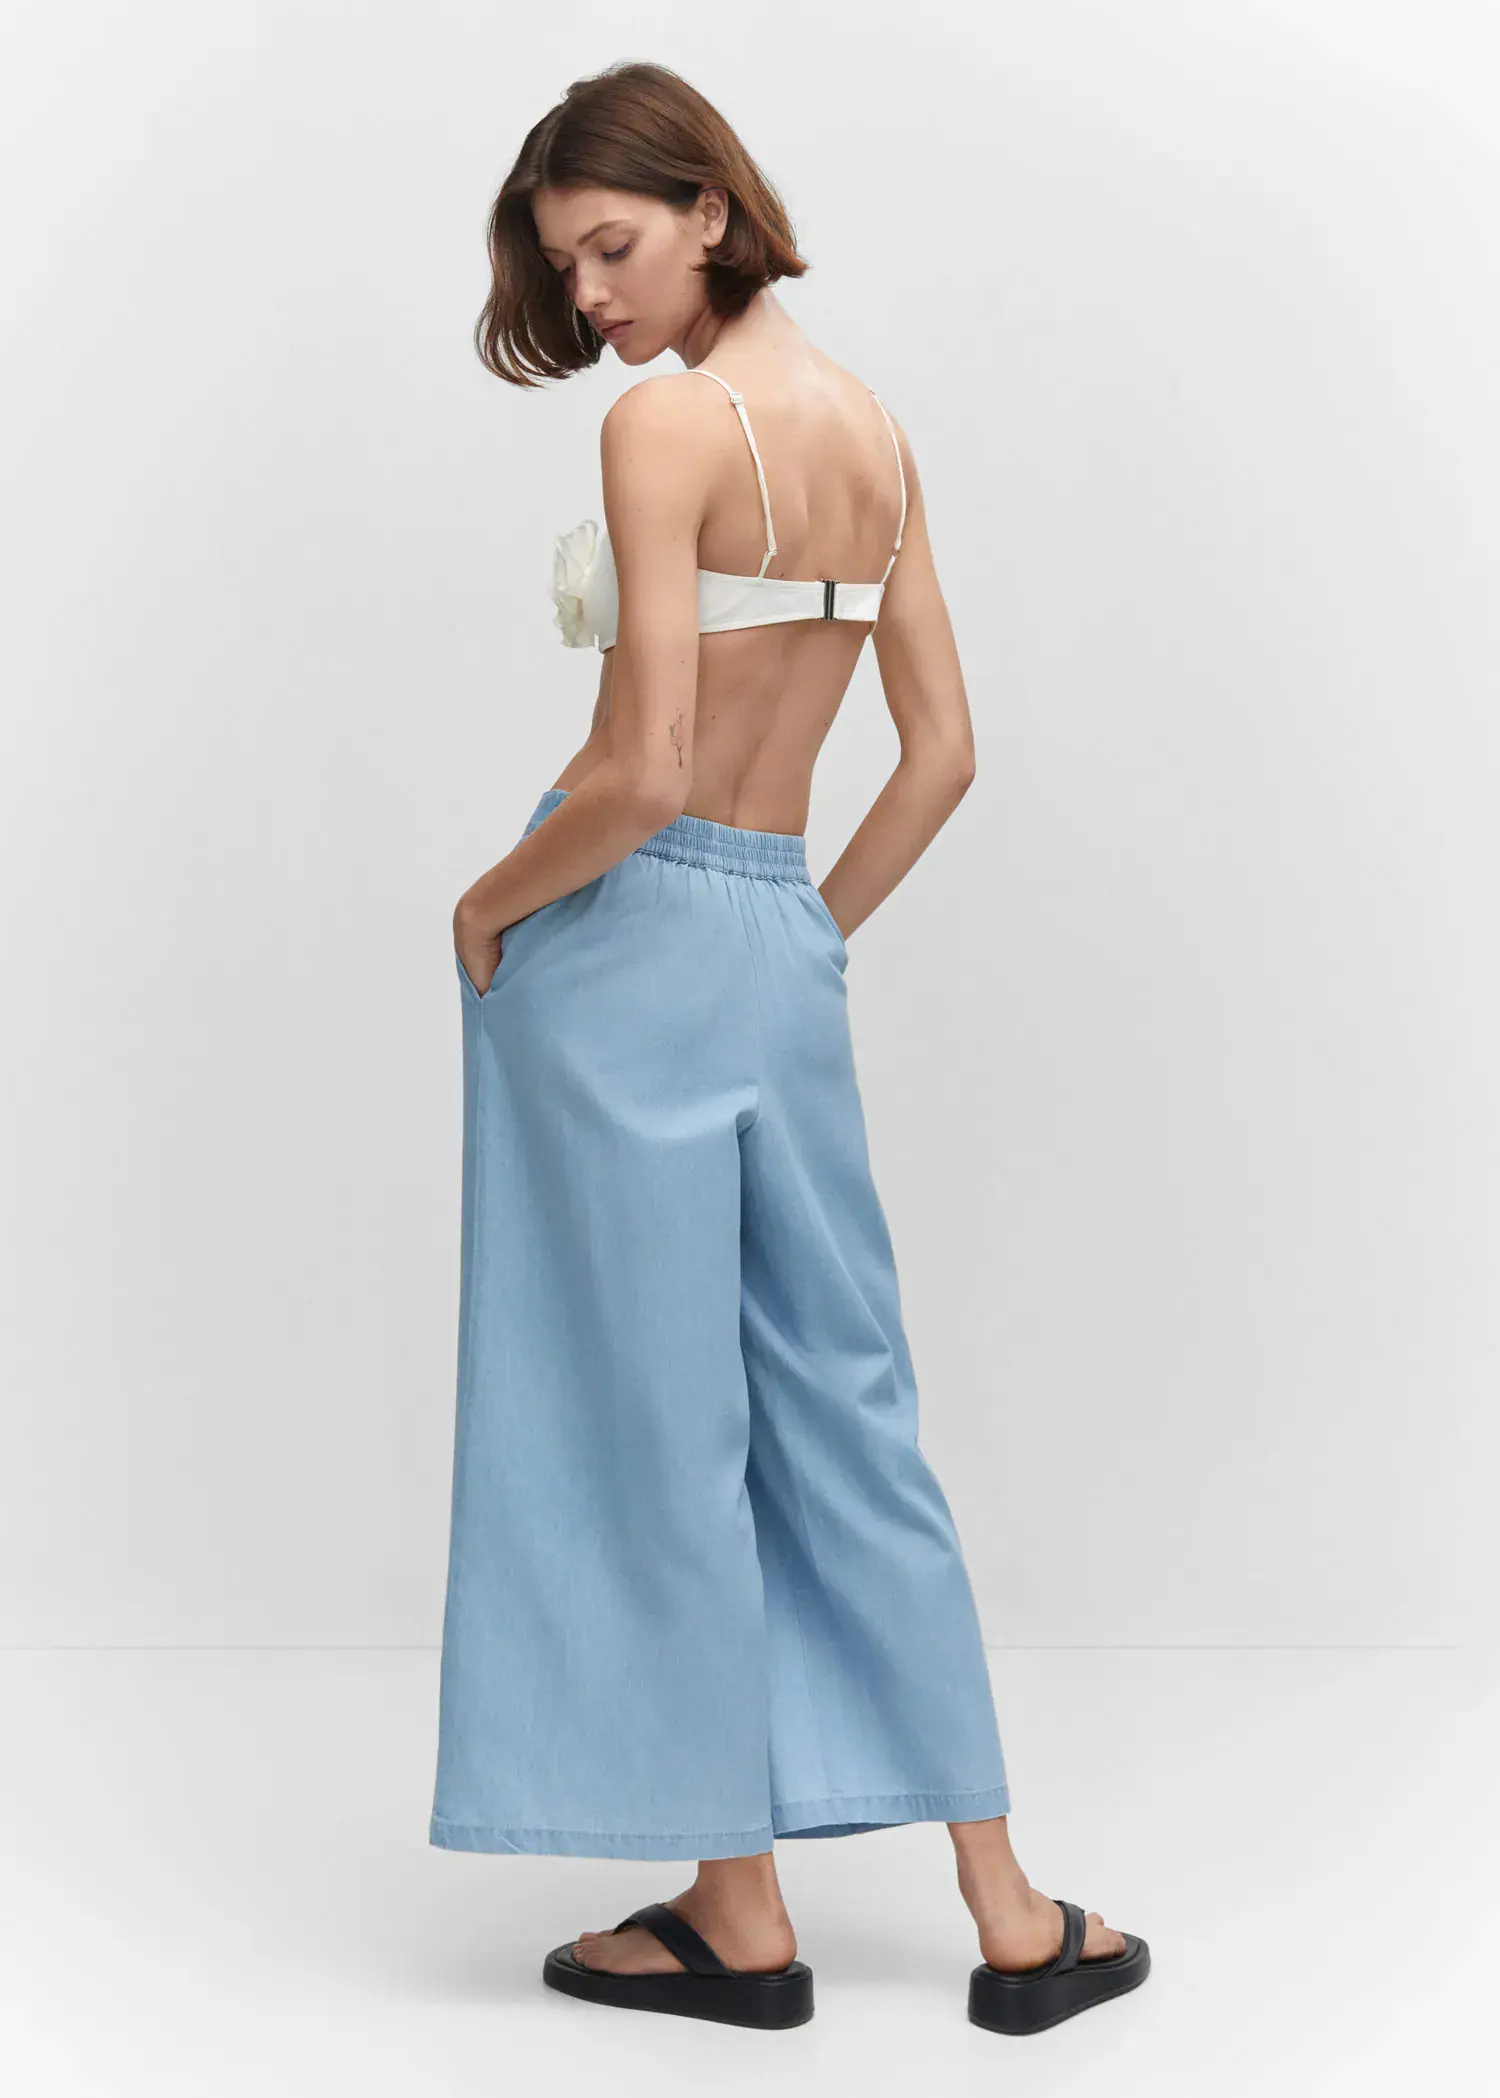 Mango 100% cotton culotte trousers . a woman in a white top and light blue pants. 